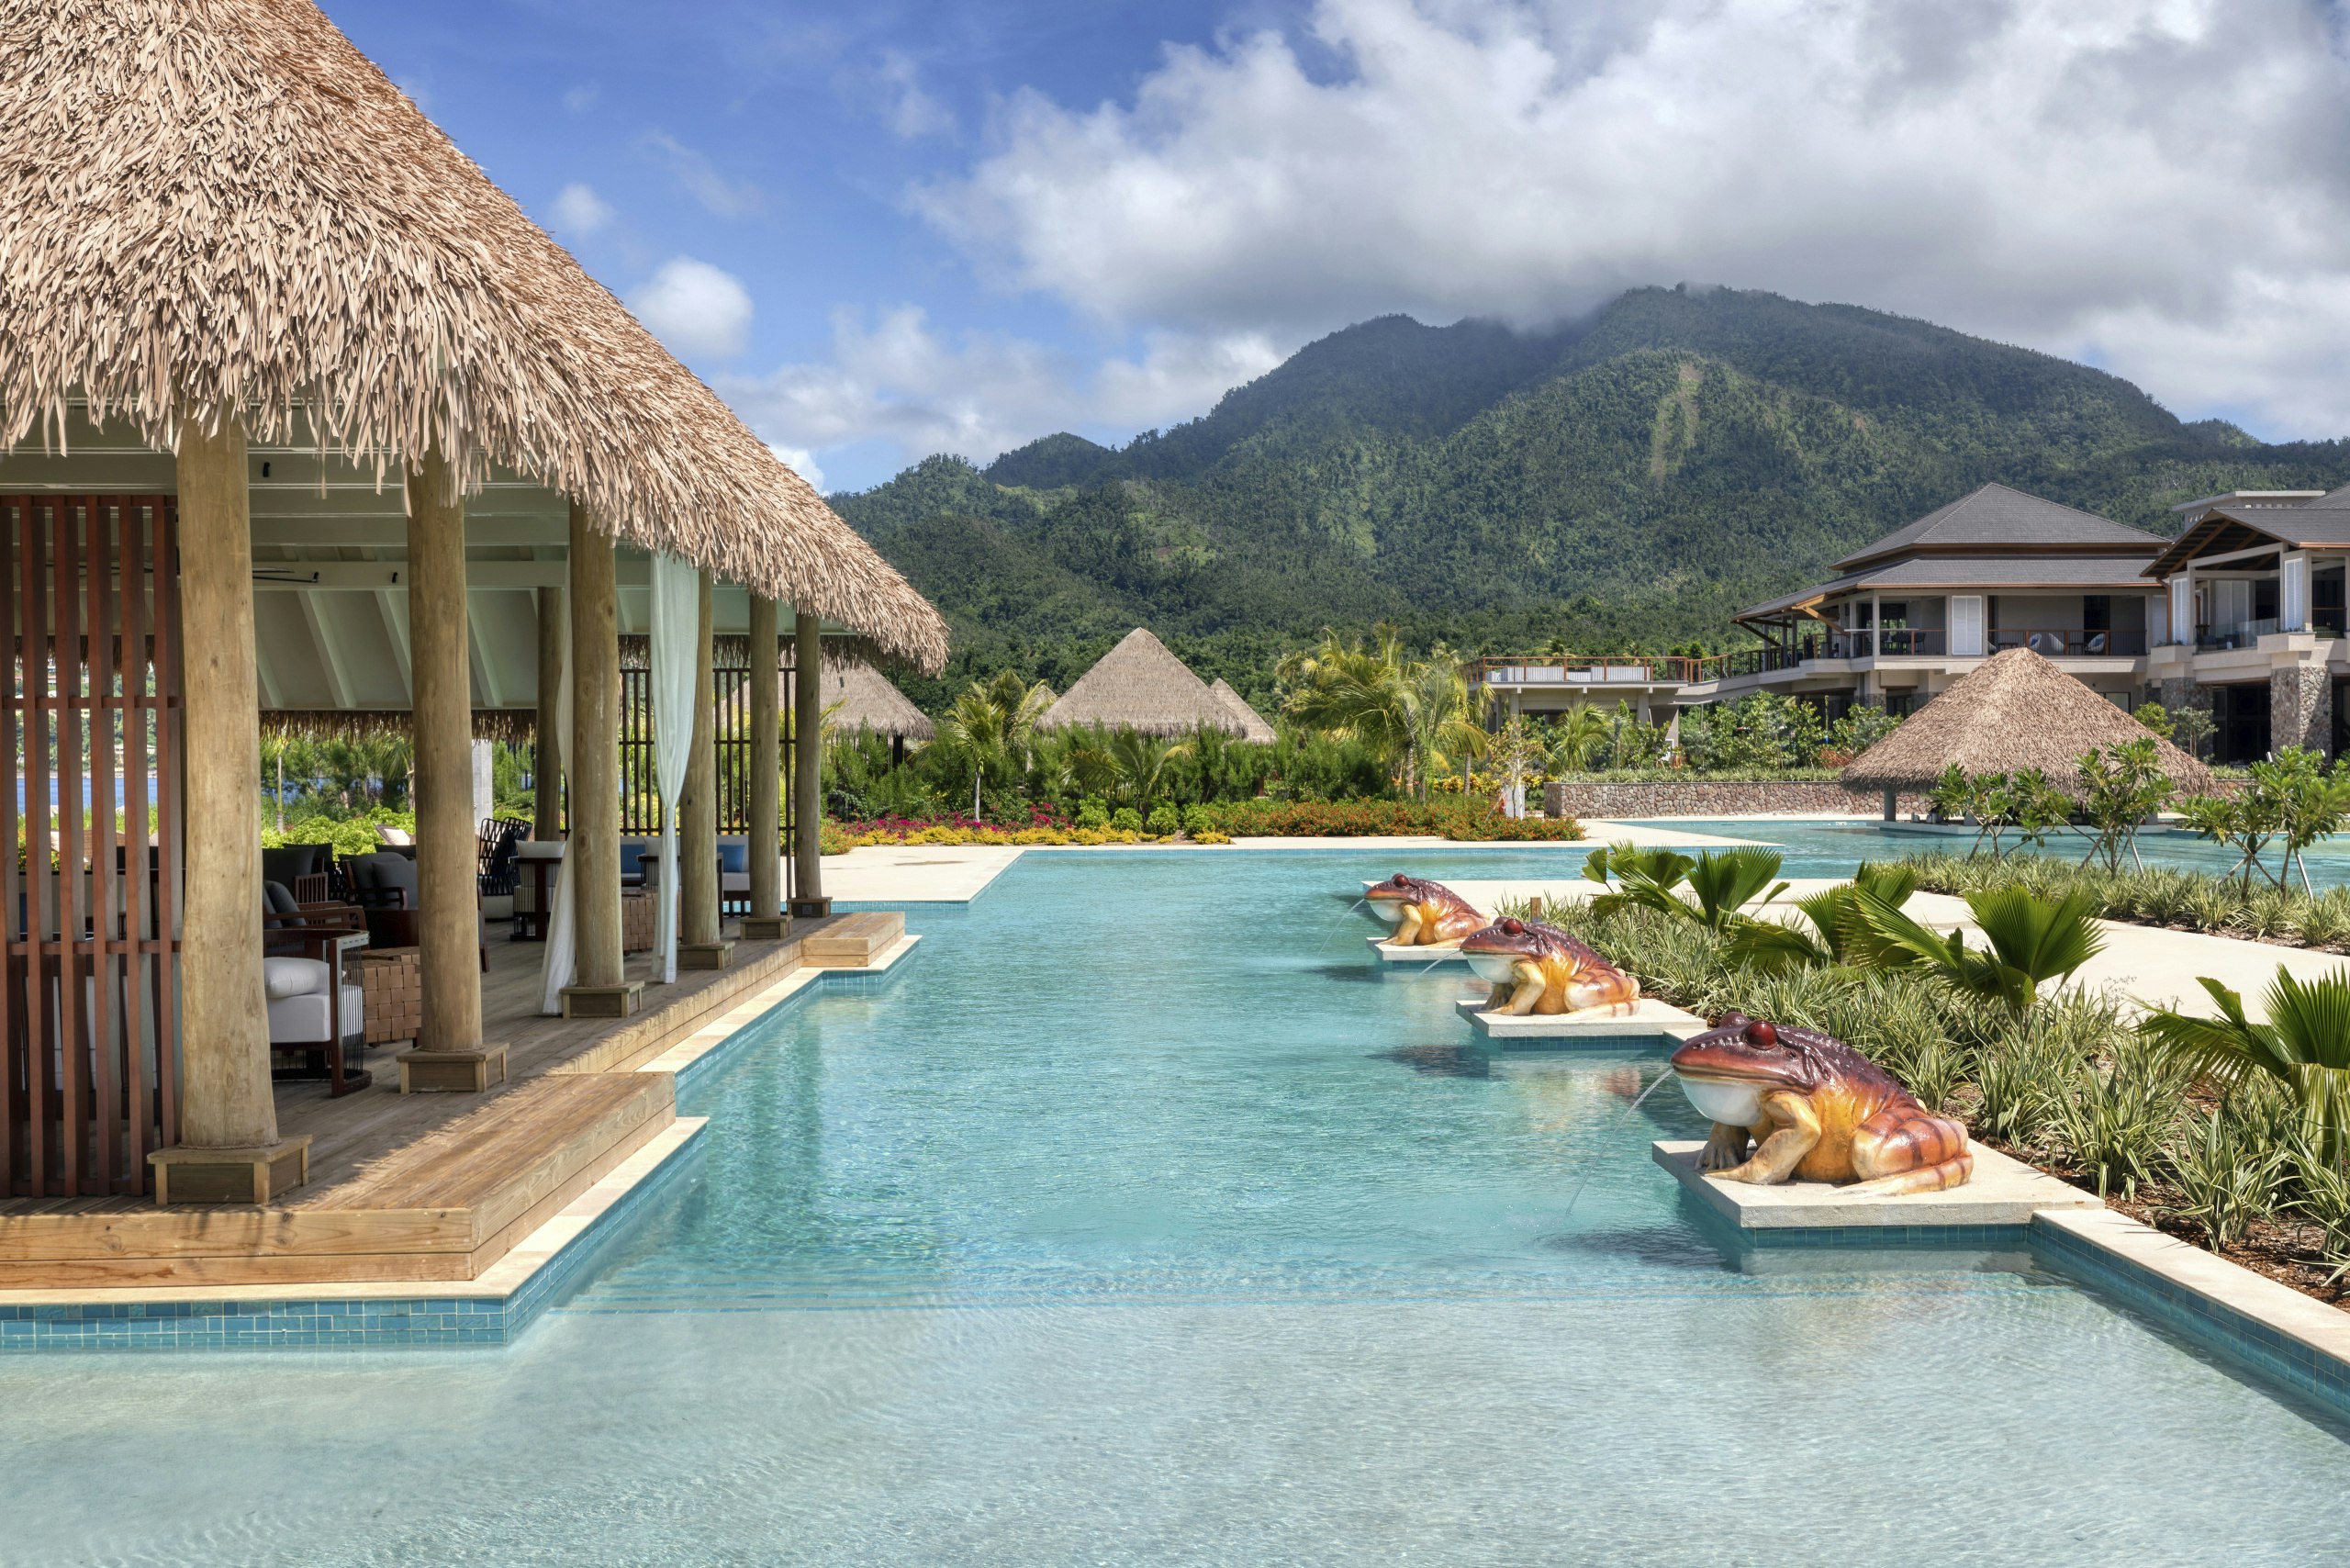 Exterior shot of Cabrits Resort's pool with three large frog statues spitting water into the large pool. There is a large open-air thatched-roof common area filled with chairs and tables. A patch of clouds cover the peak of a large verdant mountain in the distance.   